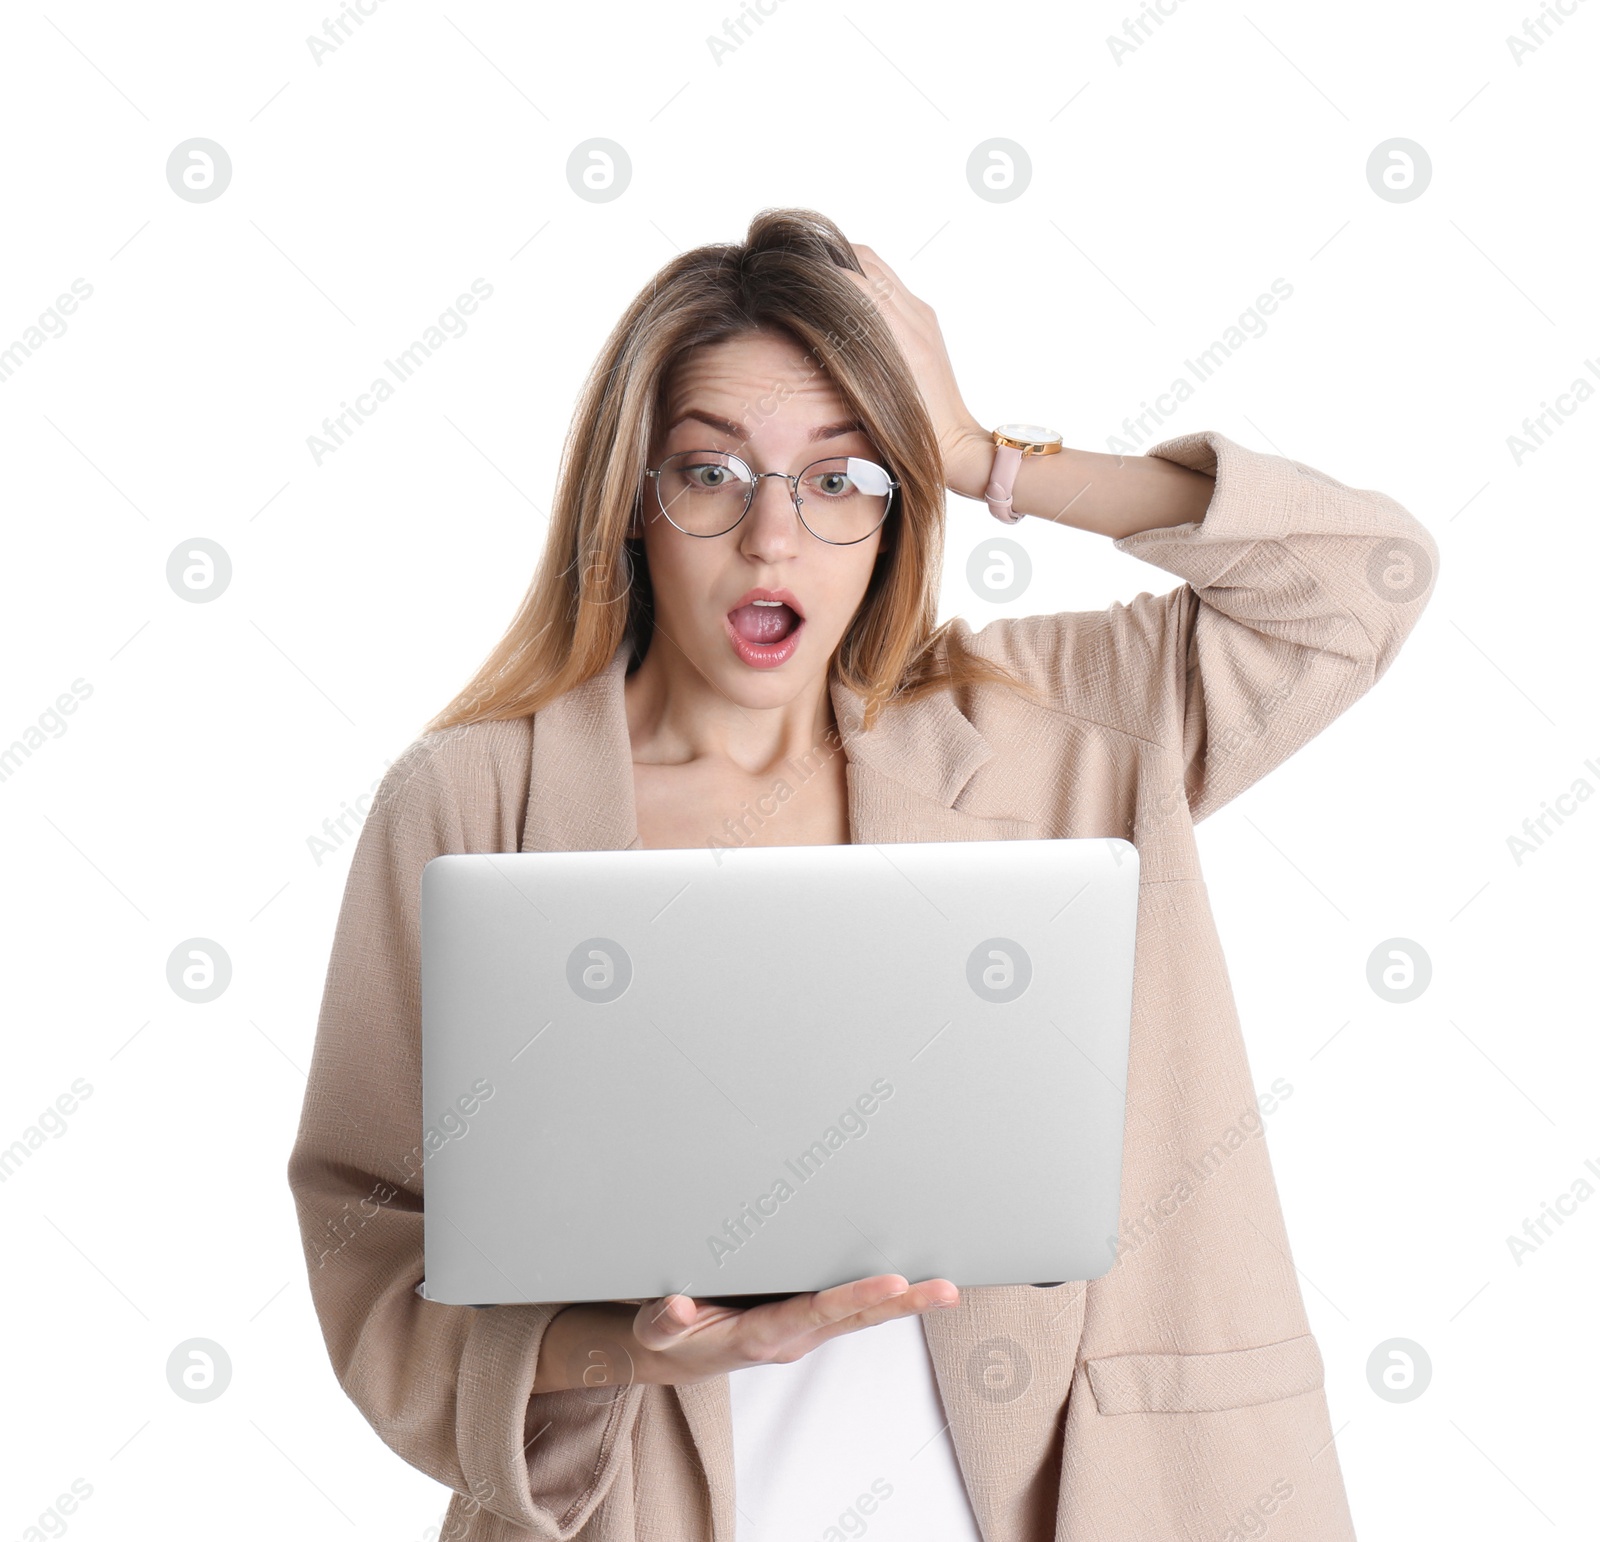 Photo of Portrait of surprised young woman in office wear with laptop on white background